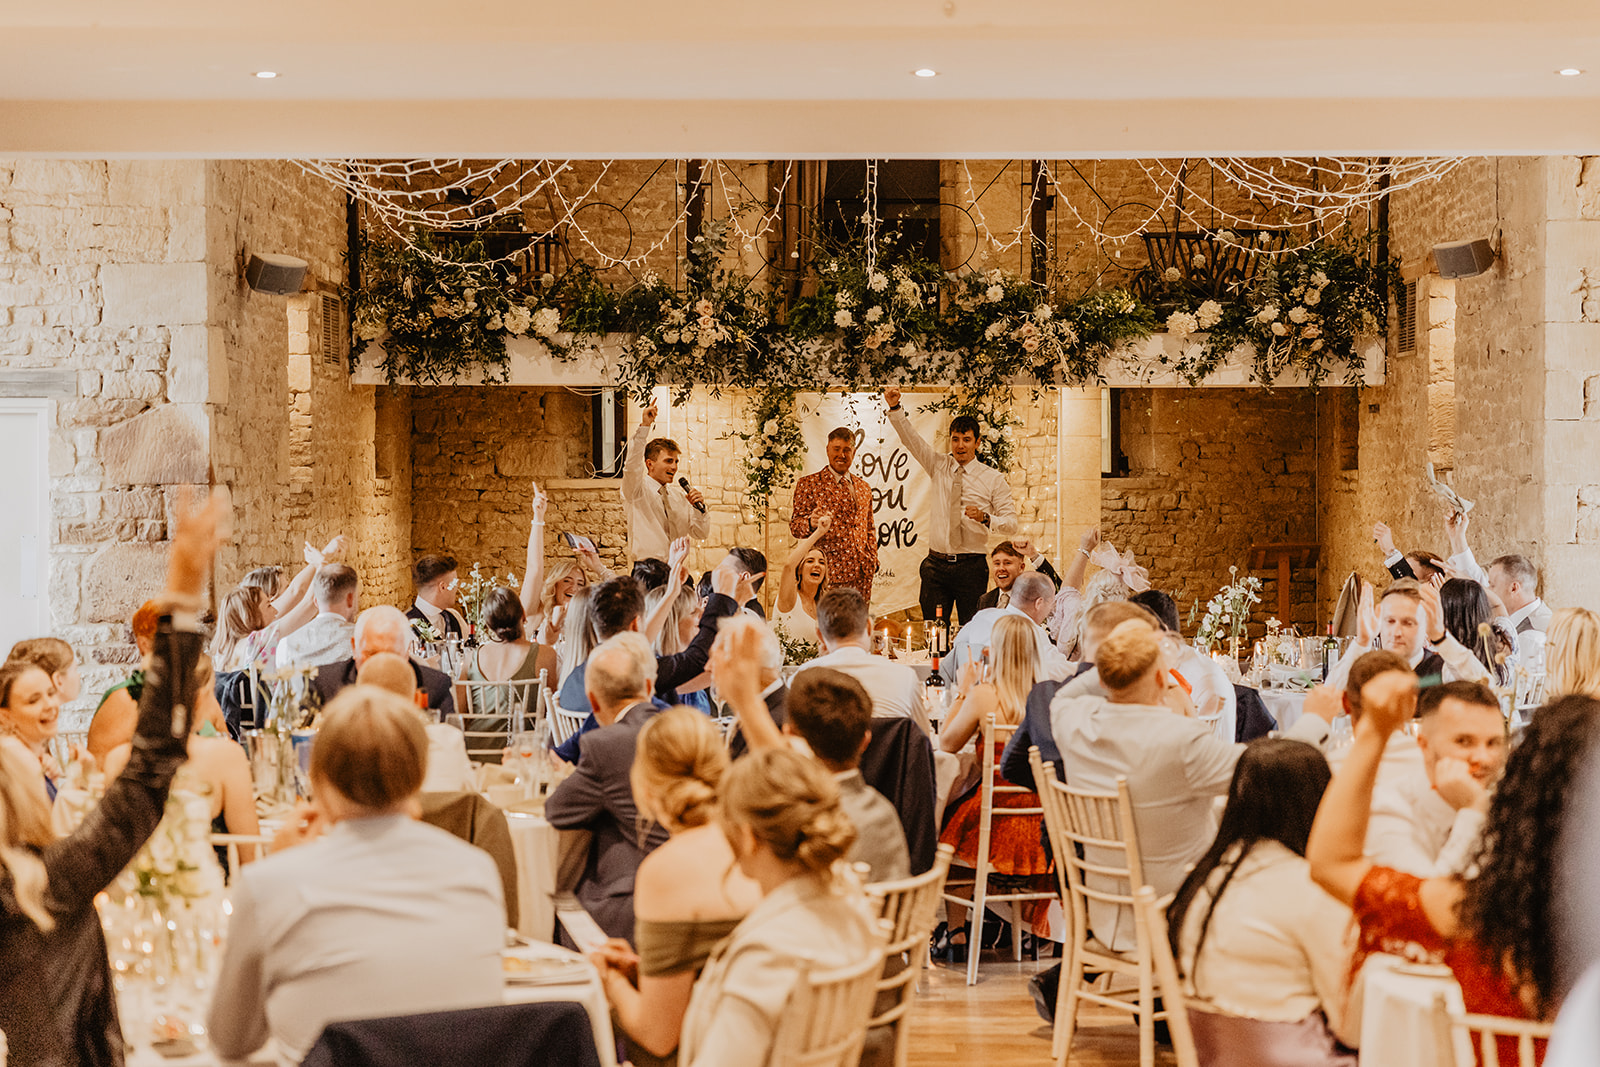 Wedding speeches at a Great Tythe Barn Wedding, Cotswolds. By Olive Joy Photography.